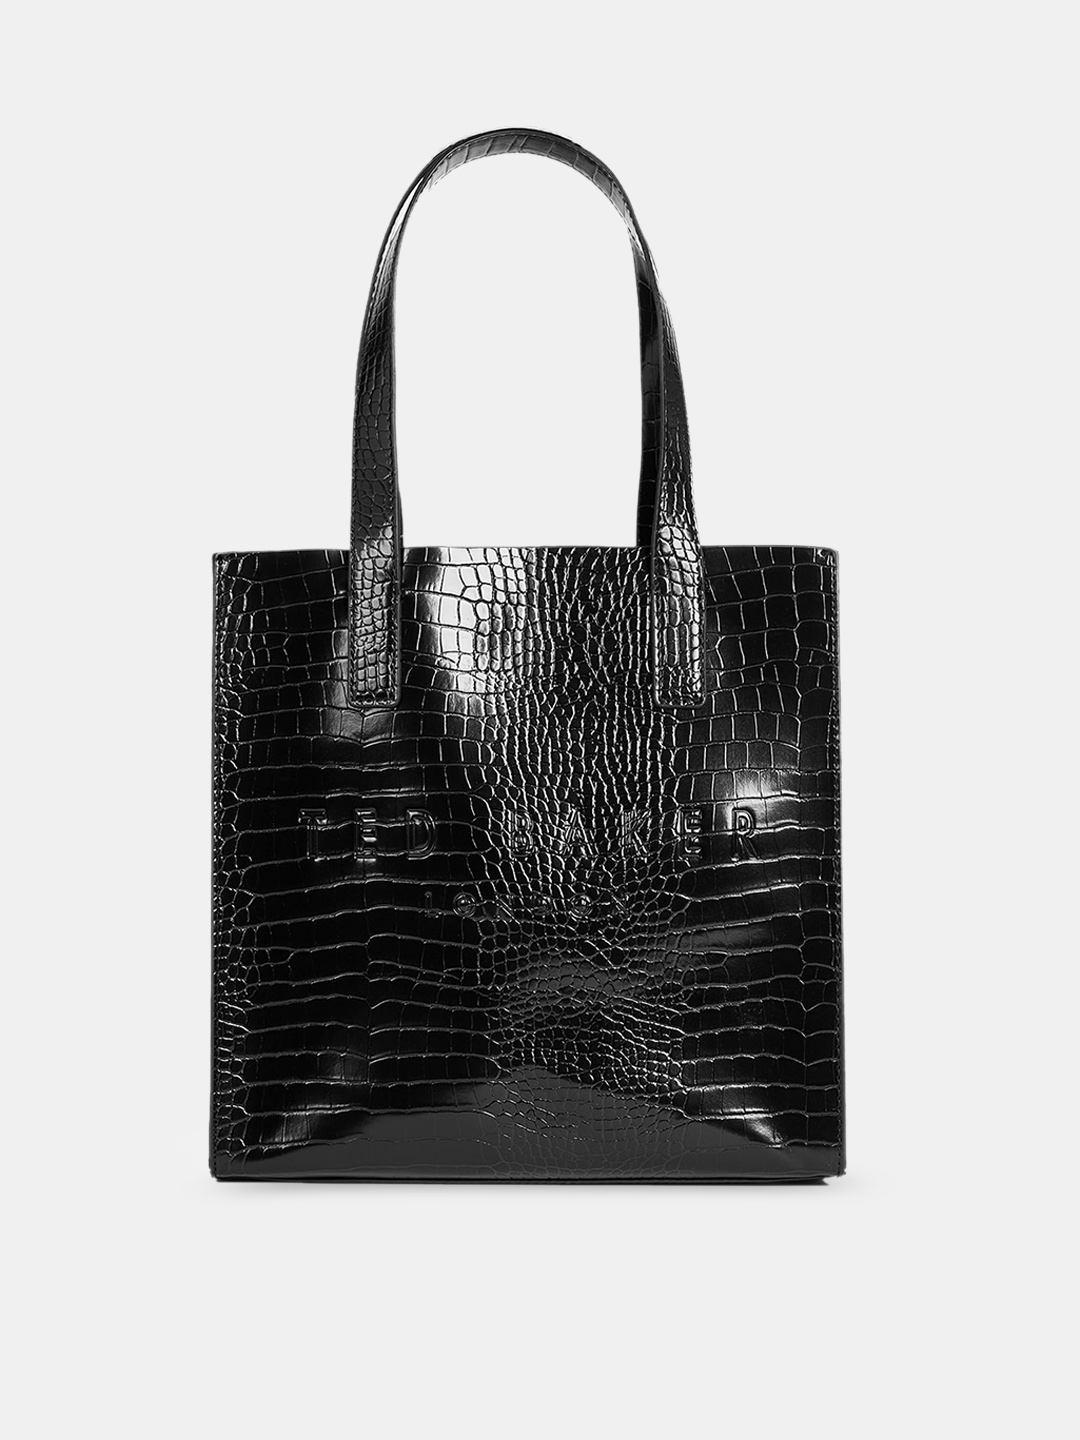 Ted Baker Animal Textured Shopper Tote Bag (Onesize) by Myntra